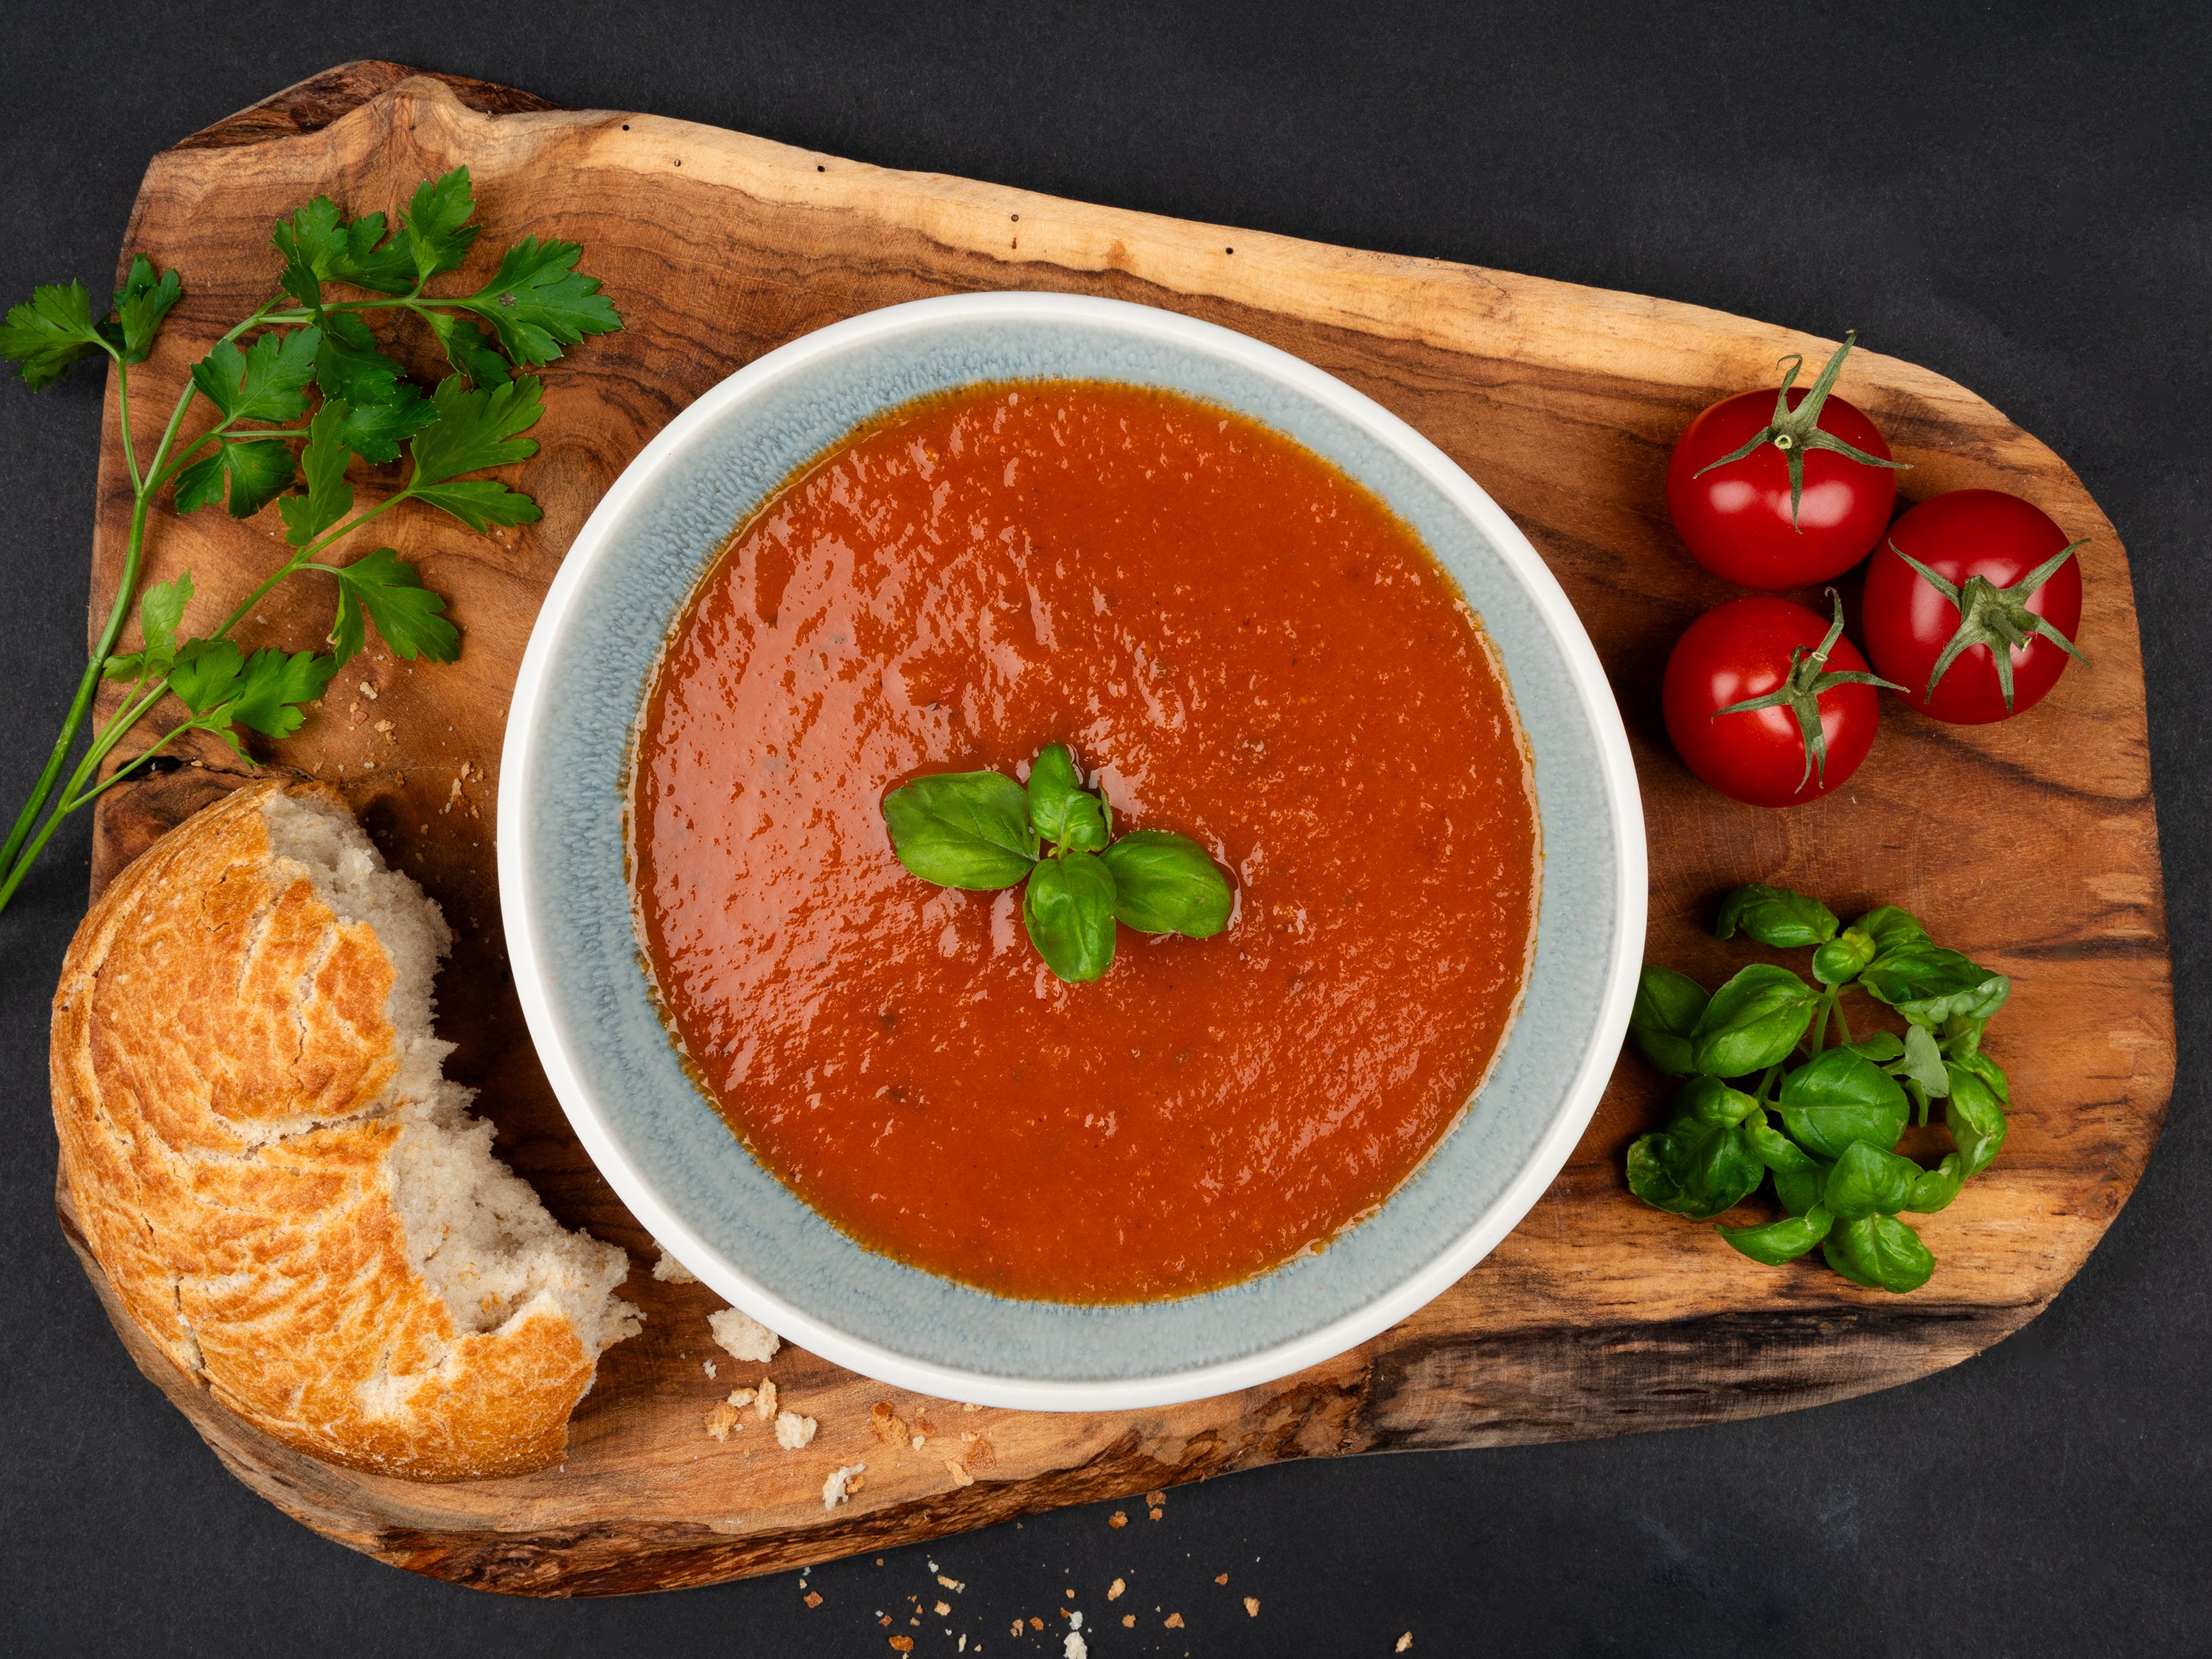 TOMATENSUPPE